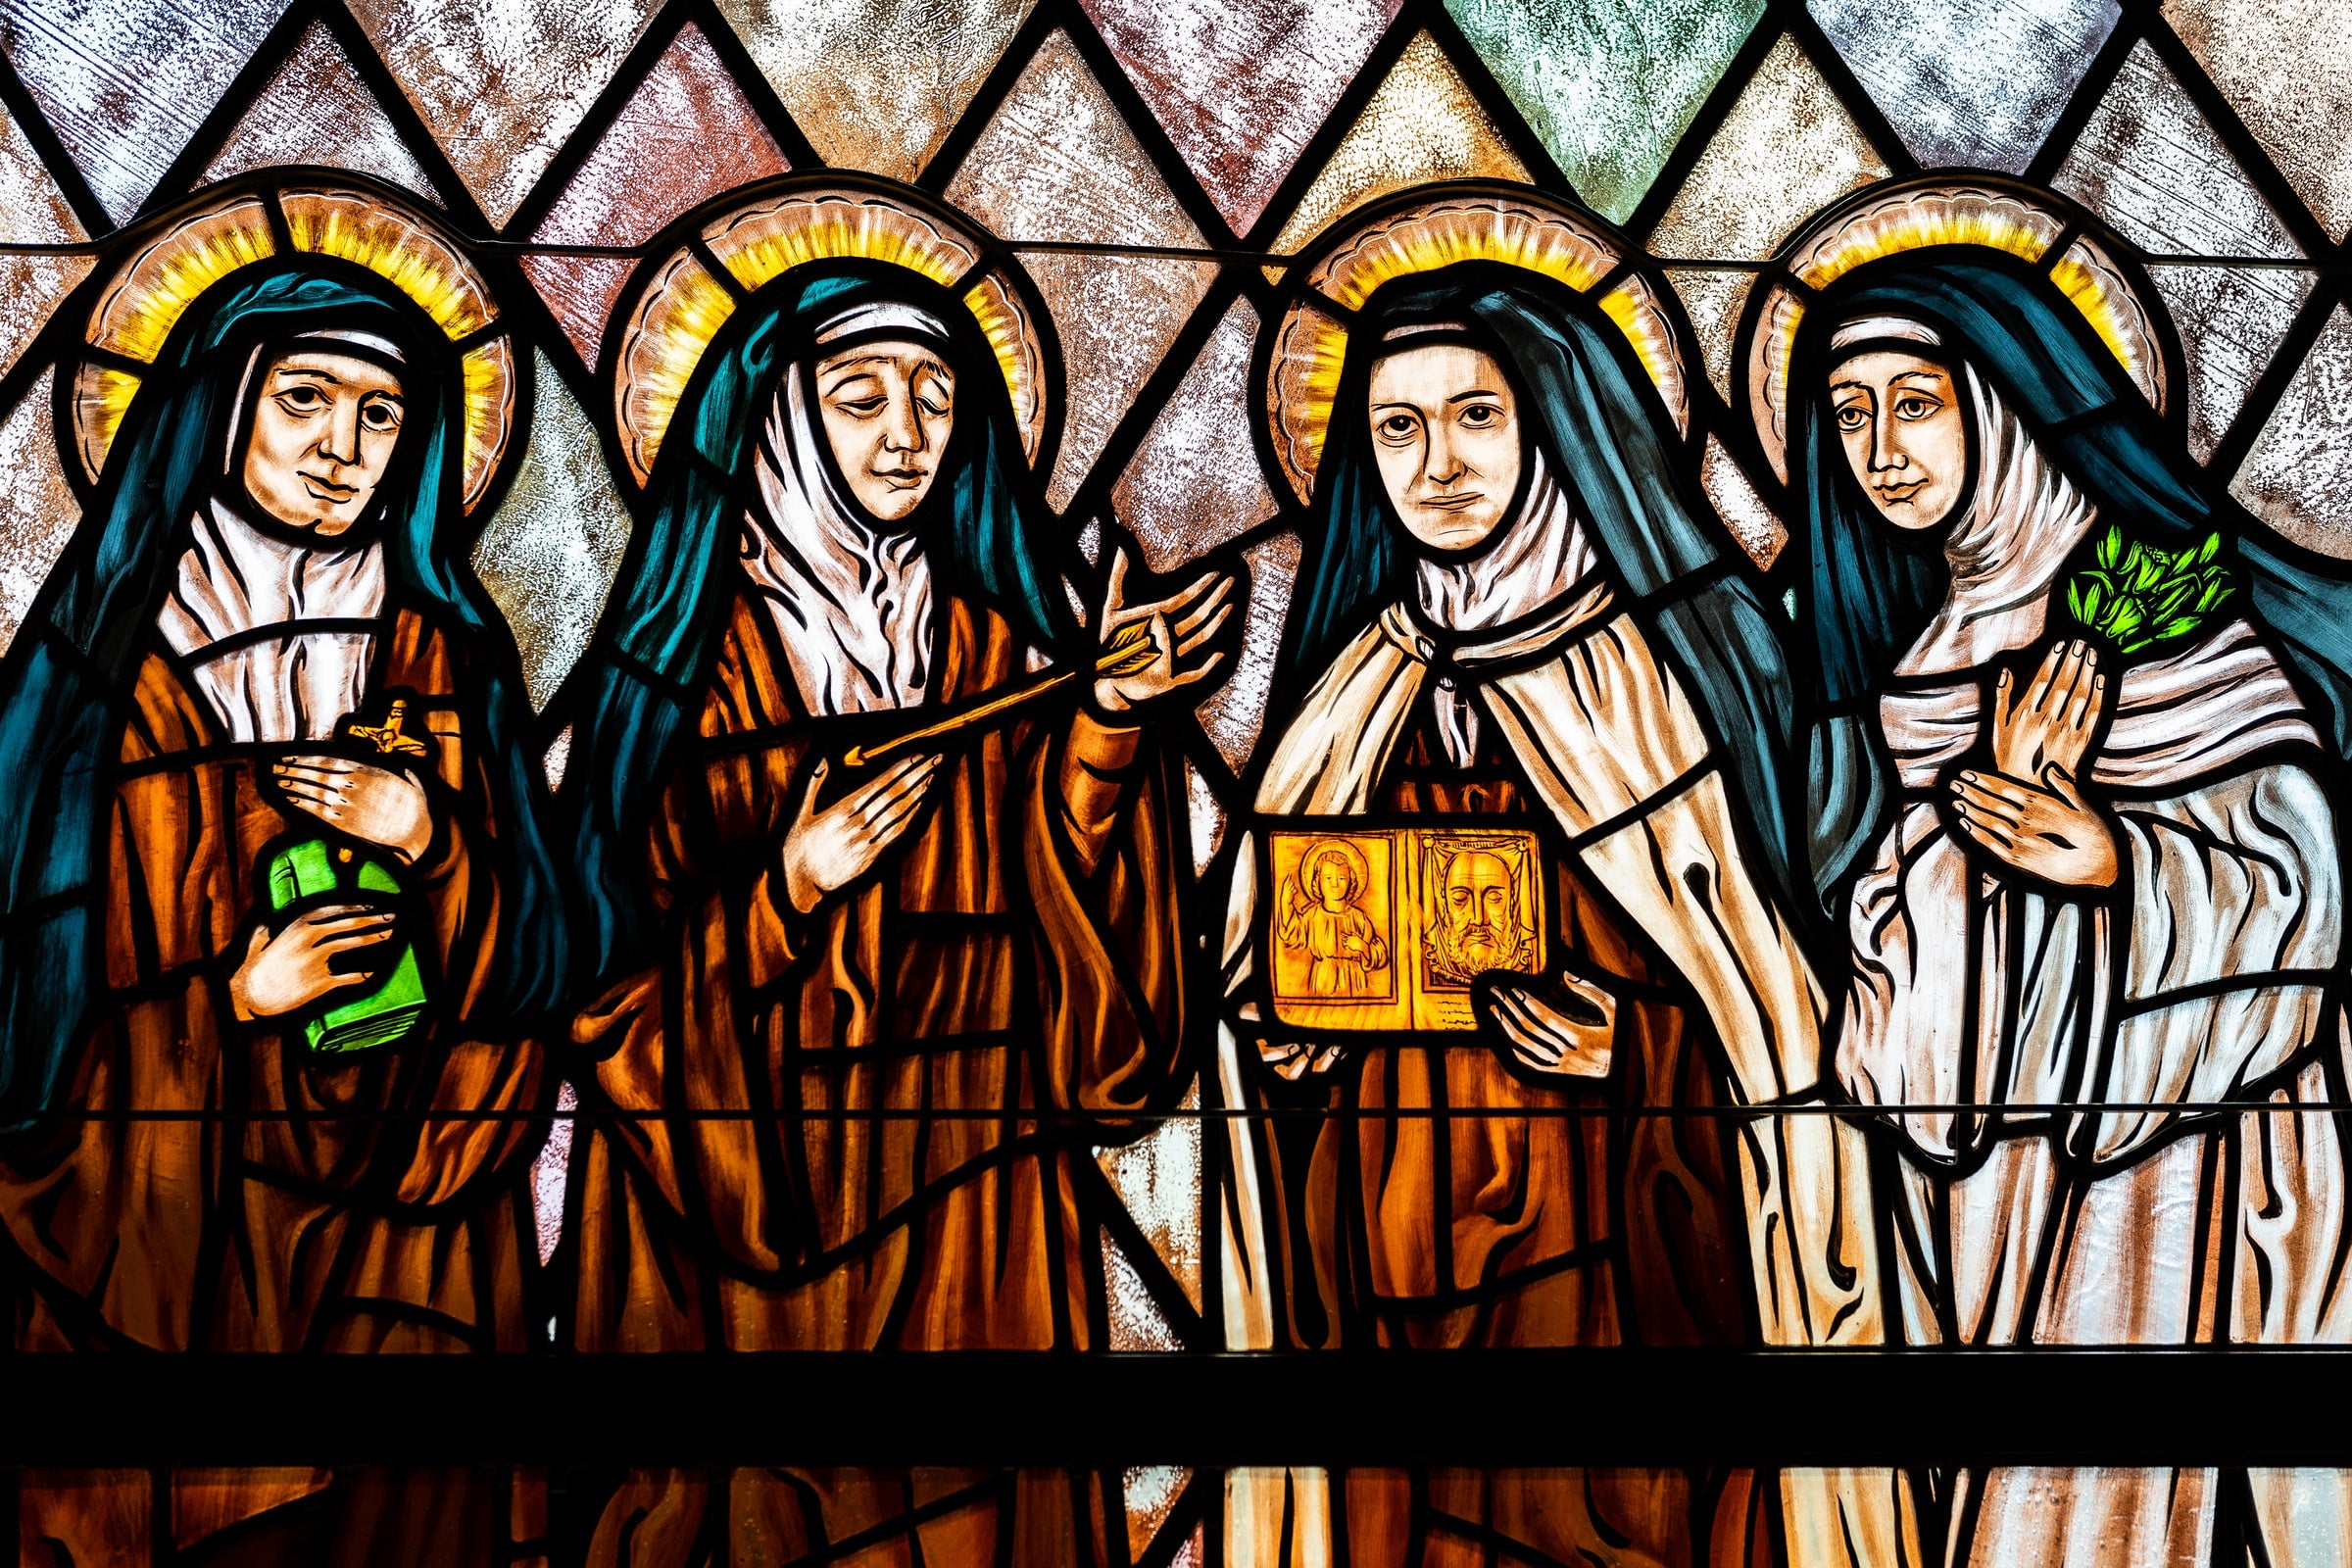 Image by Nick Castelli - A stained glass window depicting four women Doctors of the Church: St. Teresa Benedicta, St. Teresa of Avila, St. Therese of Lisieux, and St. Catherine of Sienna at St. Therese of Lisieux R.C. Church in Montauk, NY